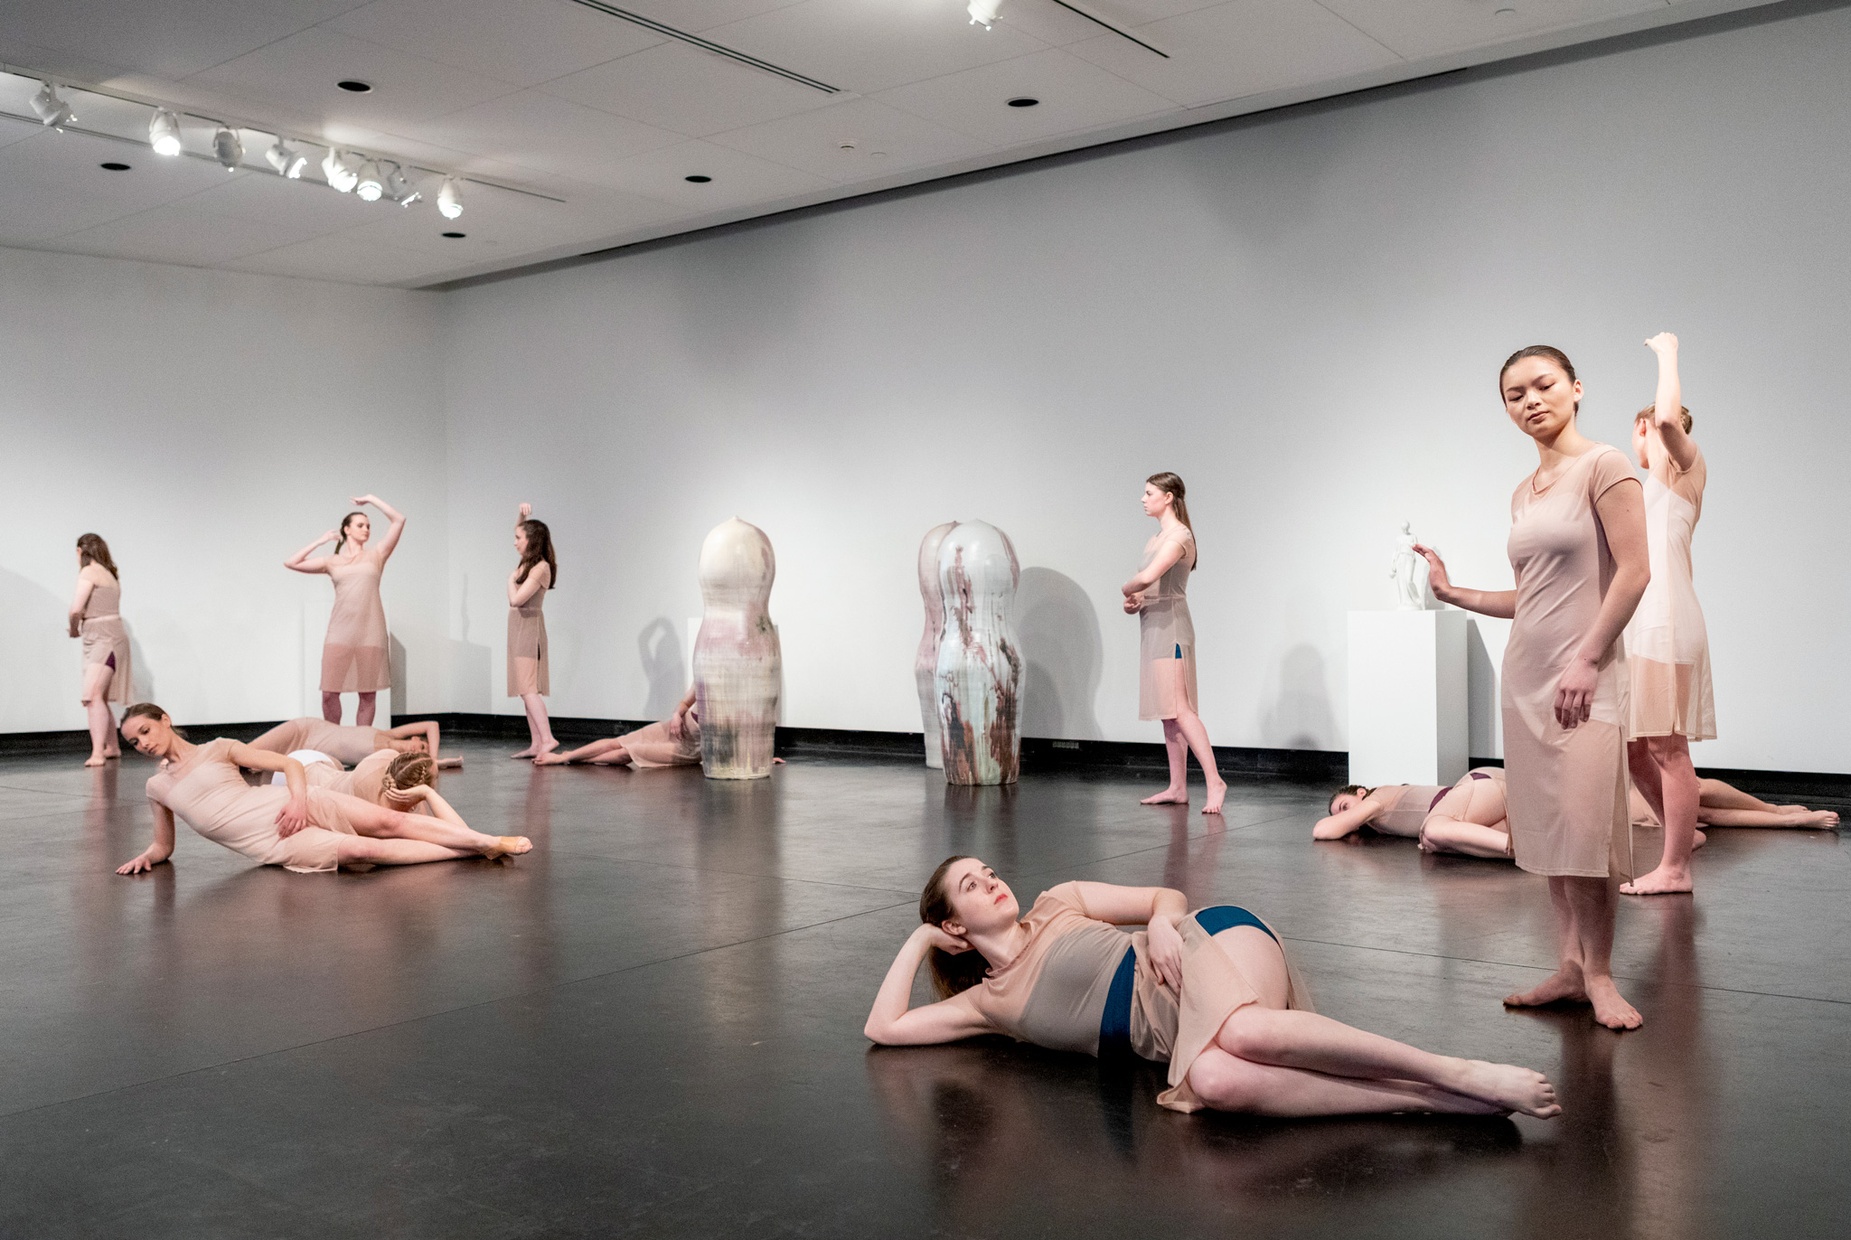 A group of female dancers in nude dresses pose in a gallery space around two, white oblong sculptures.